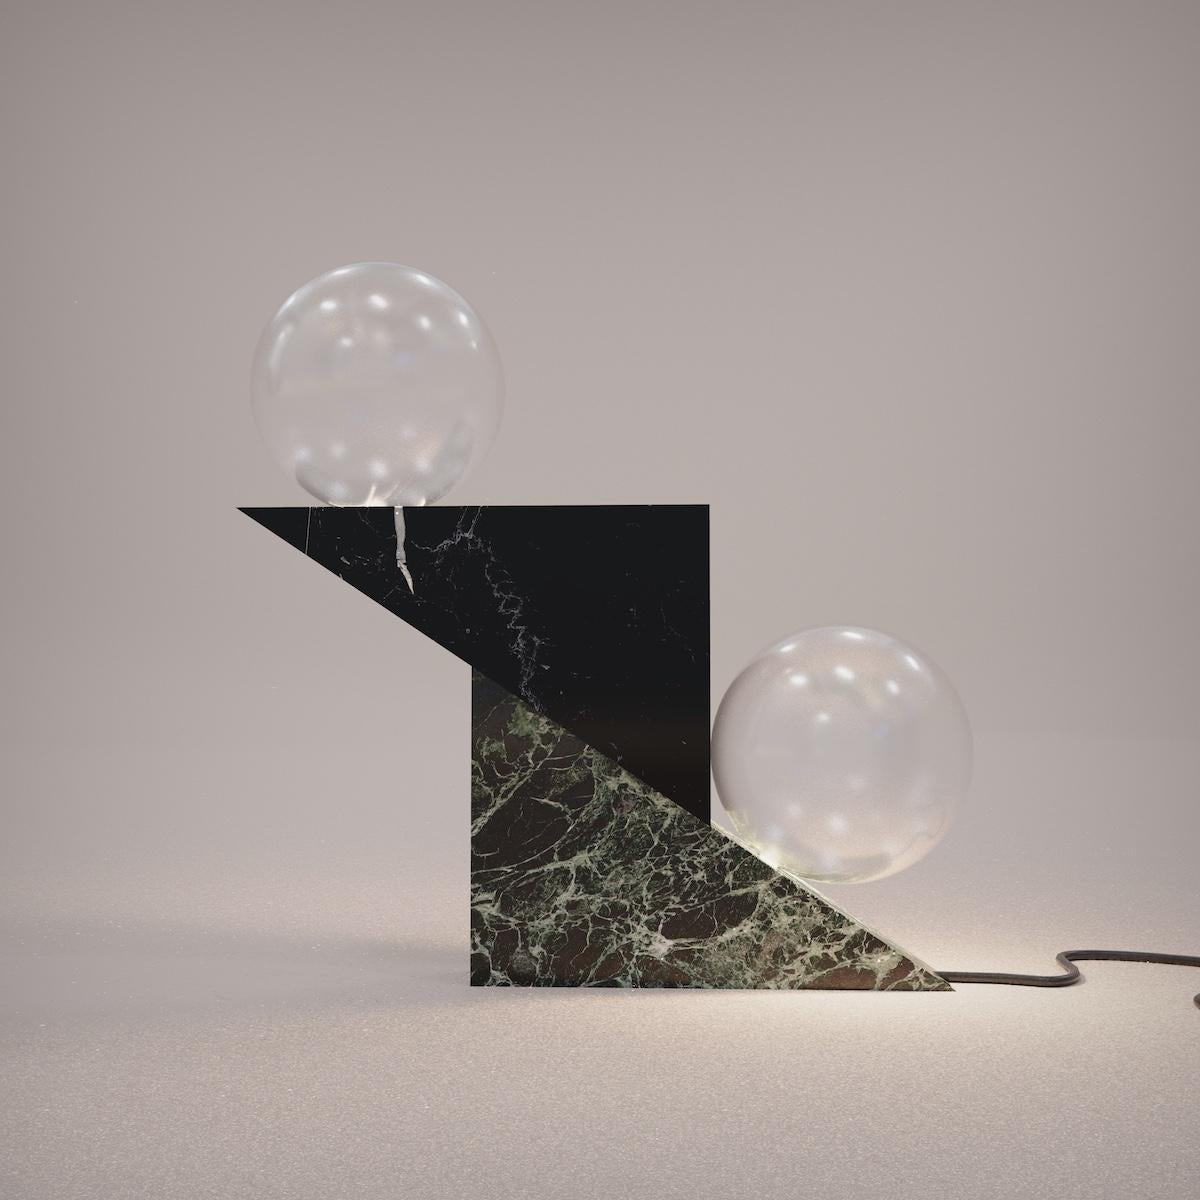 About
Italian Marble and Opal Glass Clitemnestra Table Lamp by Carcino Design

Clitemnestra Table Lamp
Design by CARCINO Design Lab exclusively for October Gallery
Table Lamp
Materials: Black Marquina Marble, Green Alpi Marble, Opal Glass